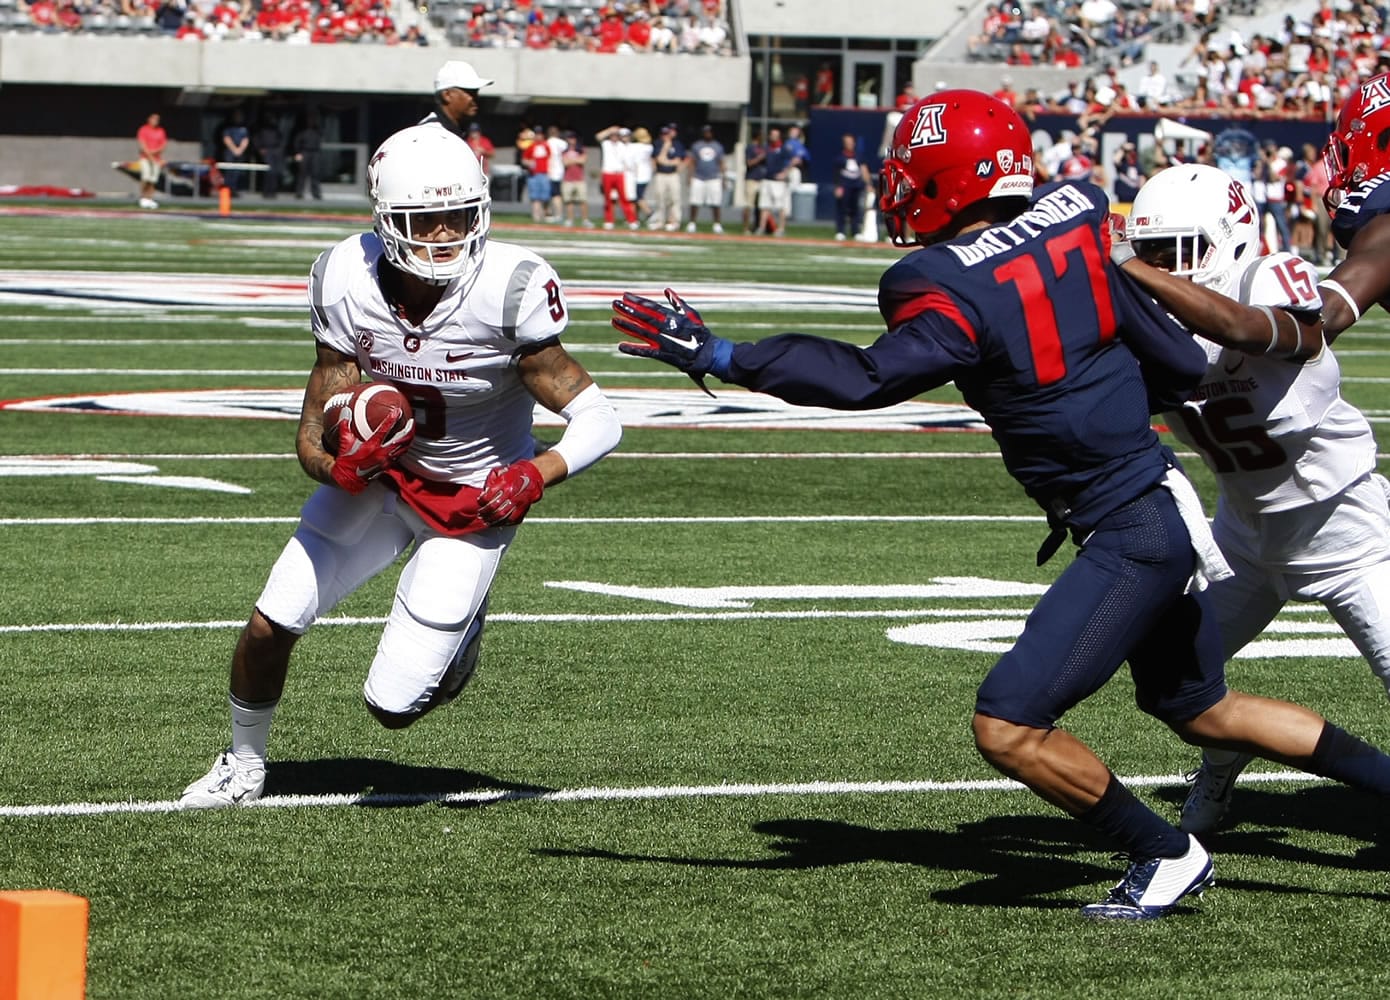 Washington State wide receiver Gabe Marks, left, scores a touchdown in front of Arizona cornerback Jace Whittaker (17) during the first half of an NCAA college football game, Saturday, Oct. 24, 2015, in Tucson, Ariz.